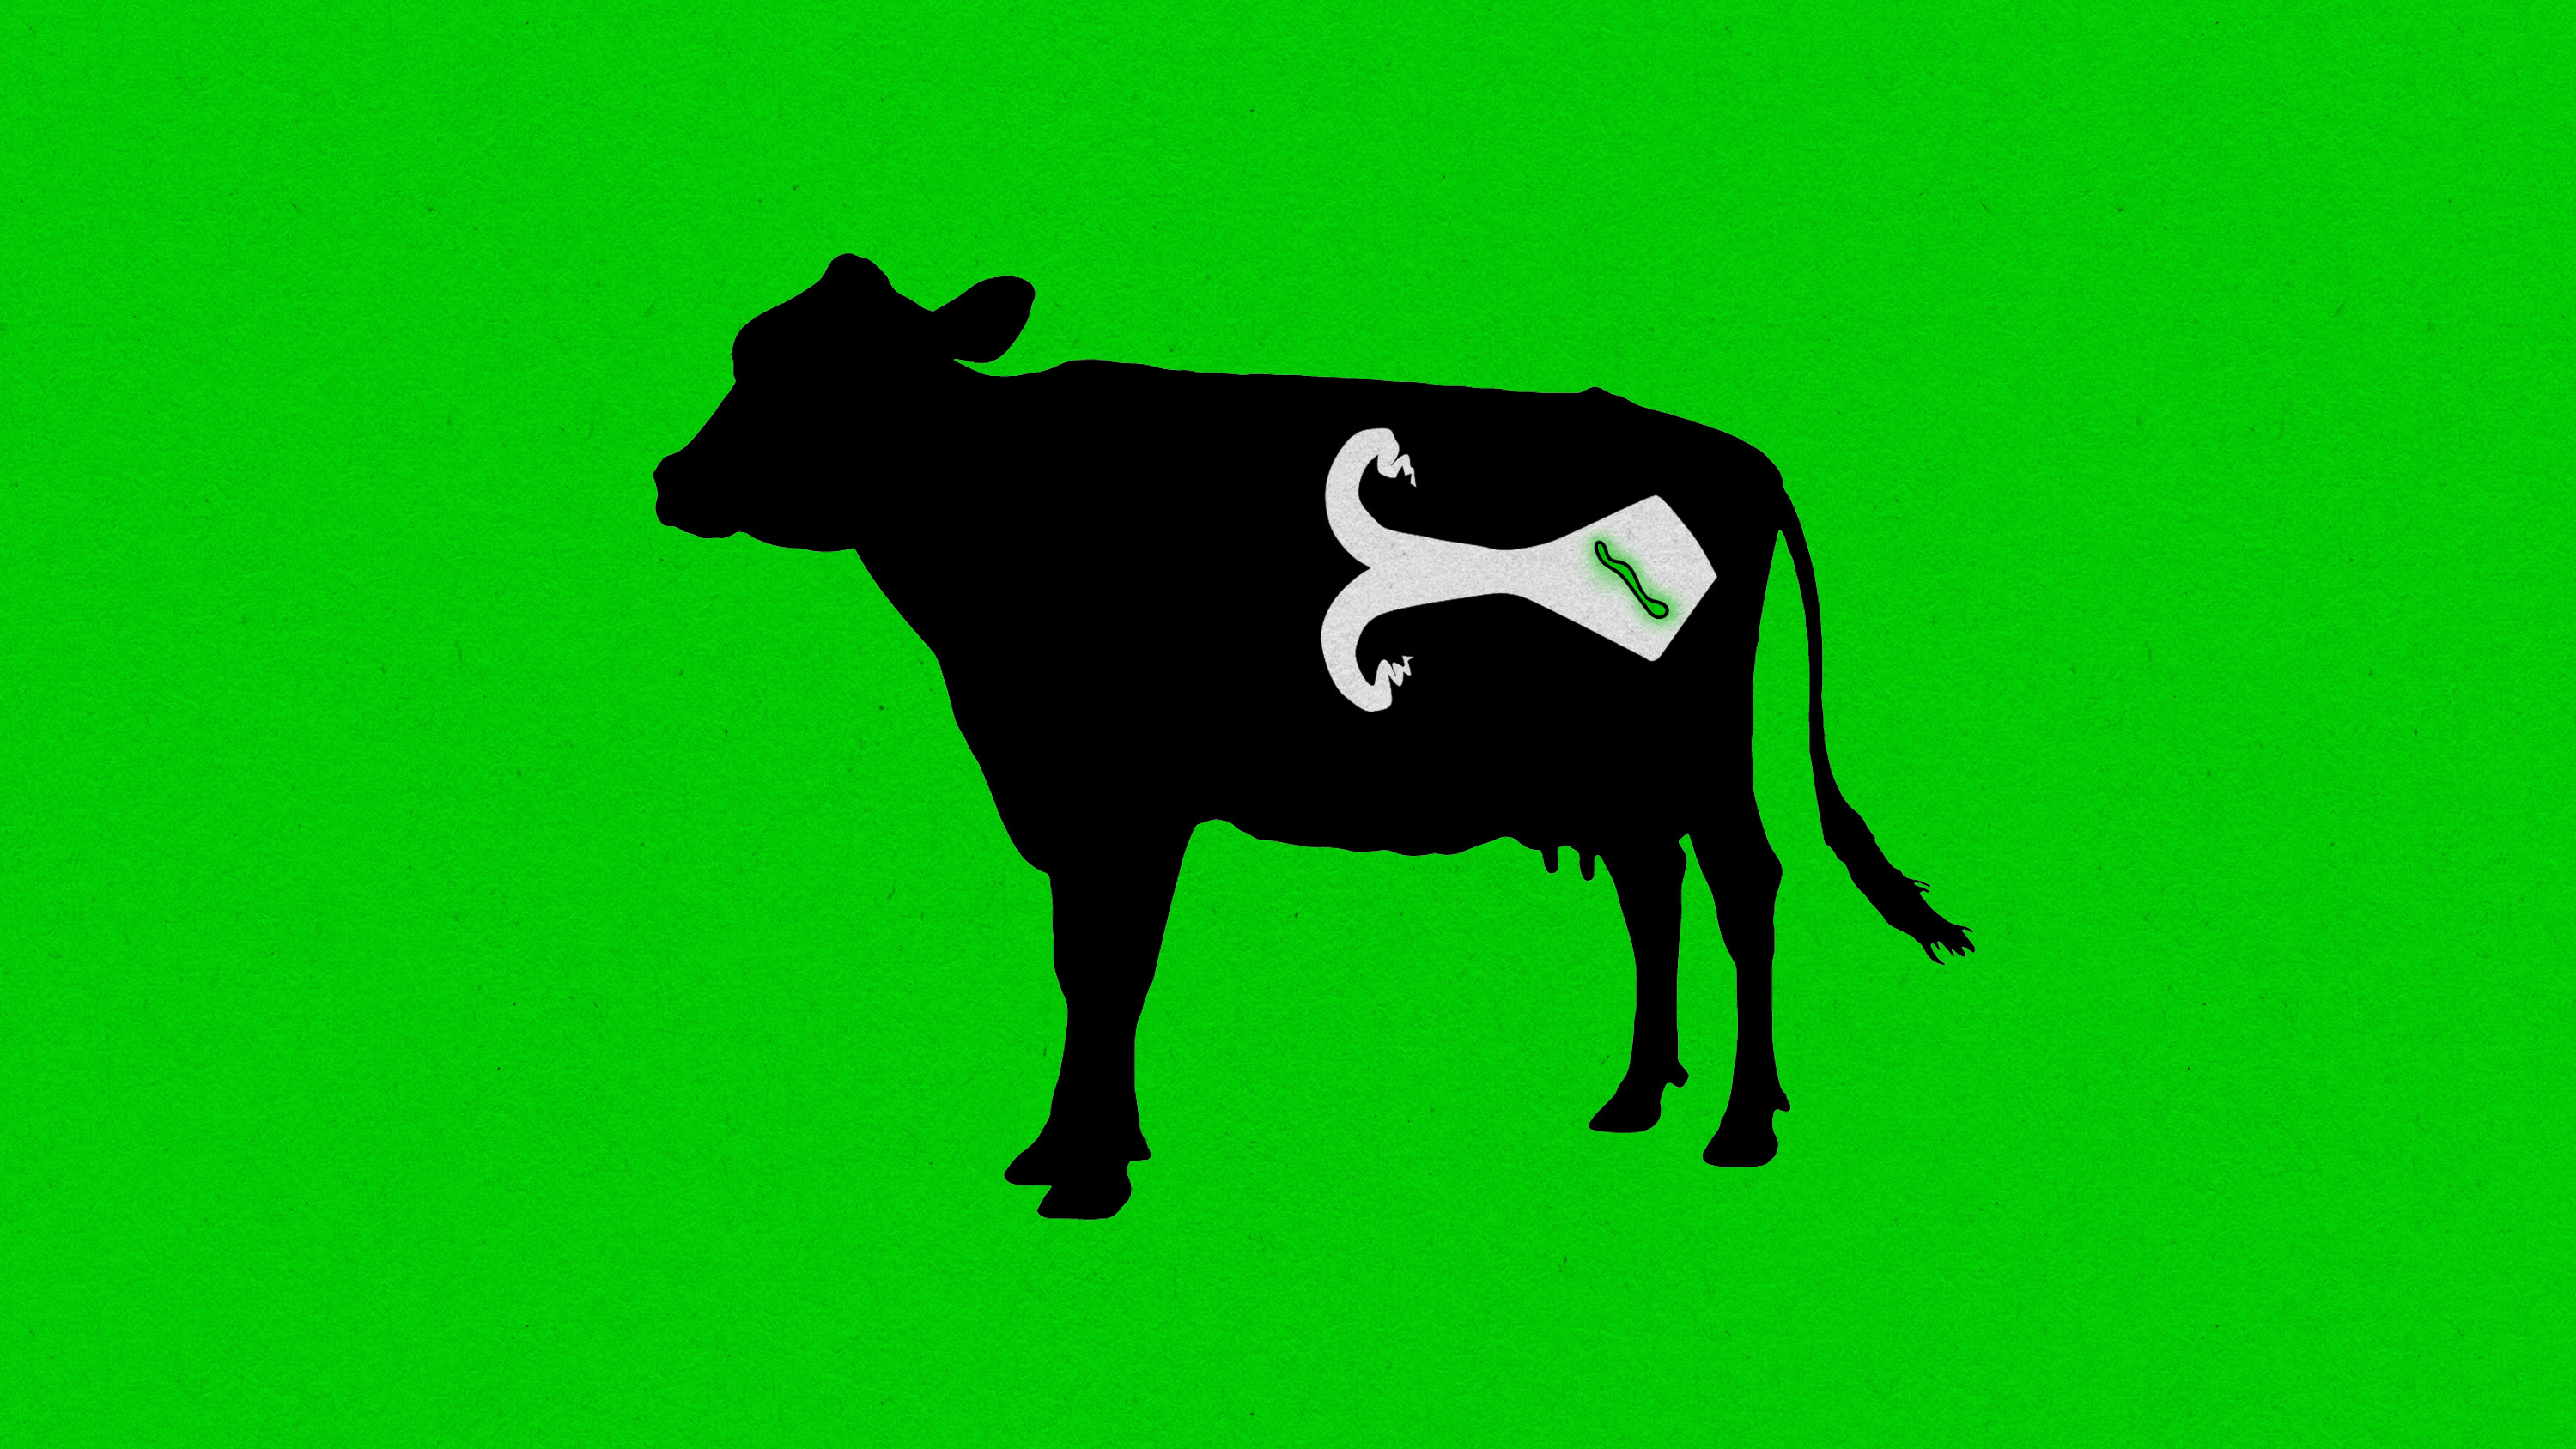 cow silhouette with uterus holding a glowing embryo